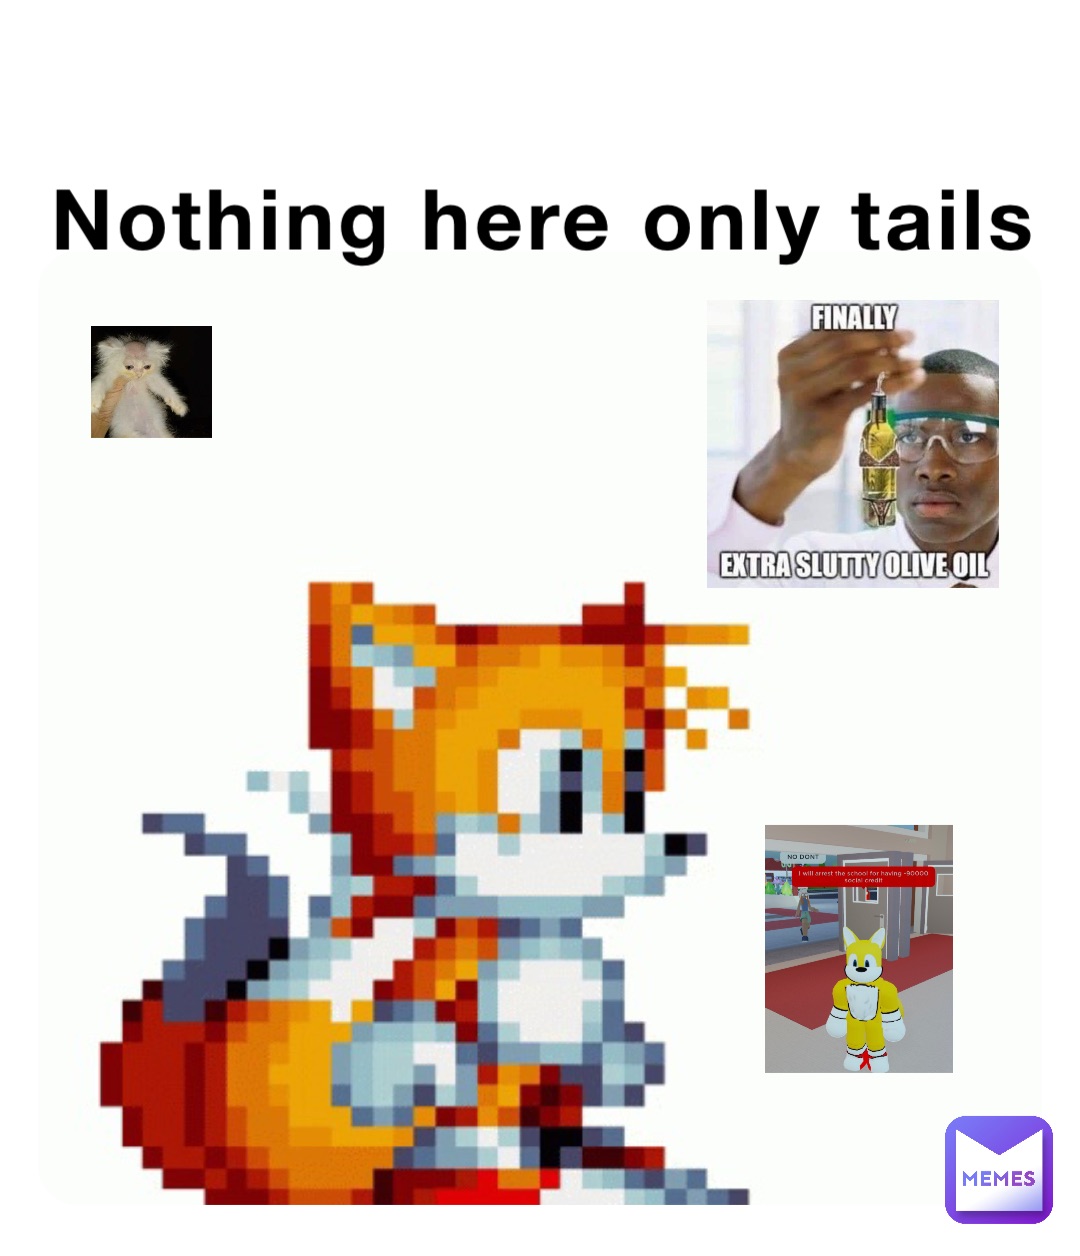 Nothing here only tails